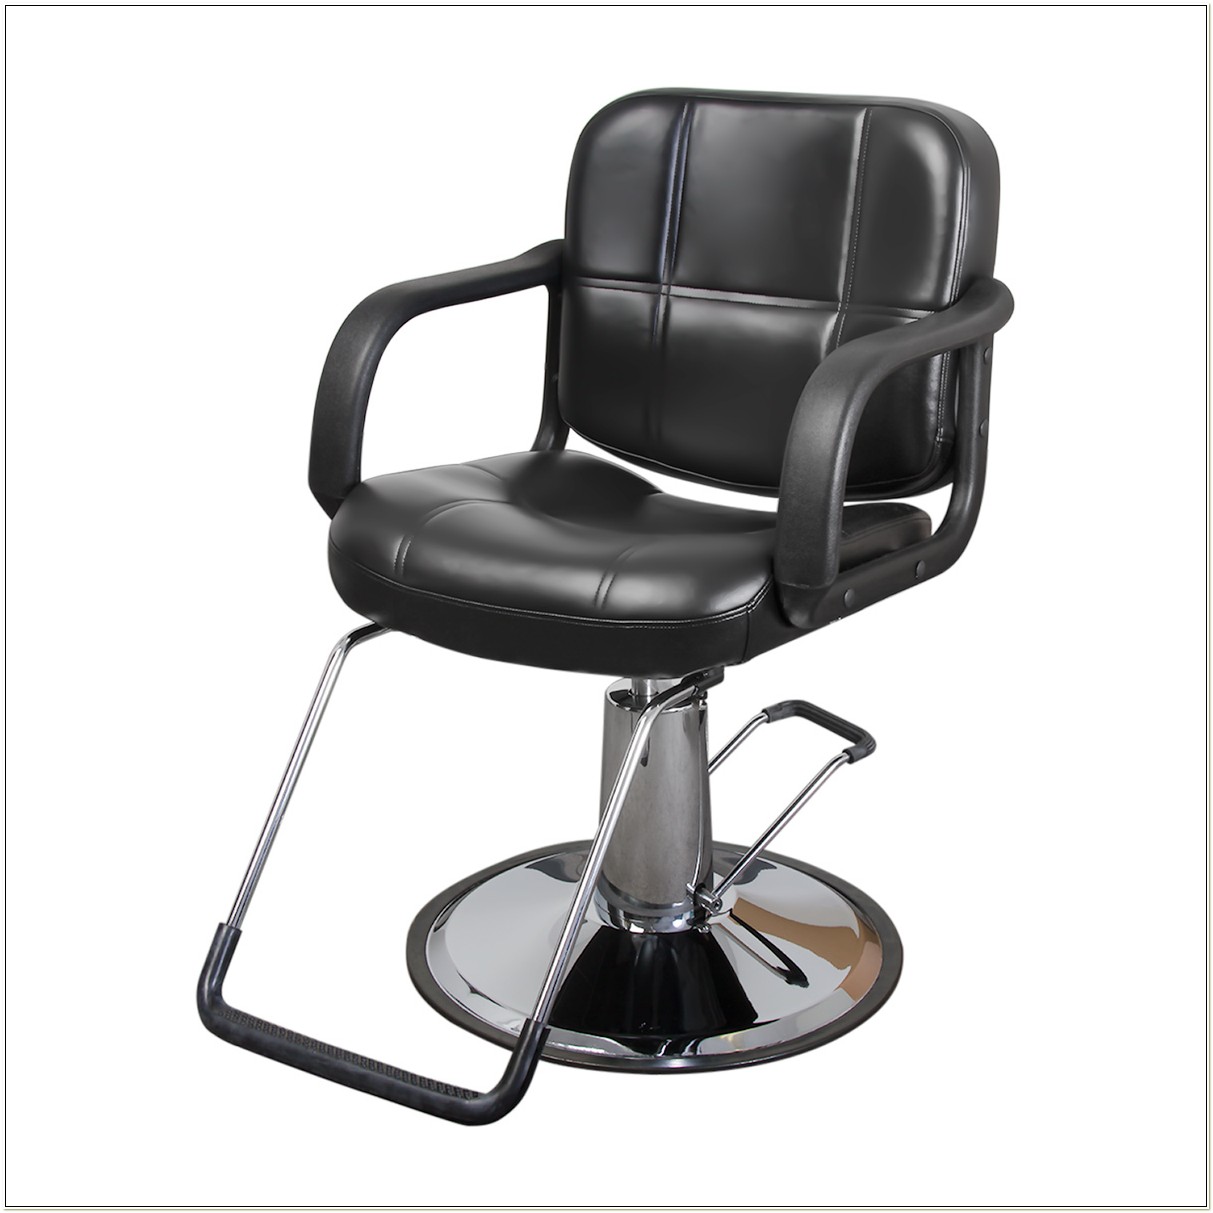 Hair Salon Styling Chairs - Chairs : Home Decorating Ideas #qWVkv31r2A